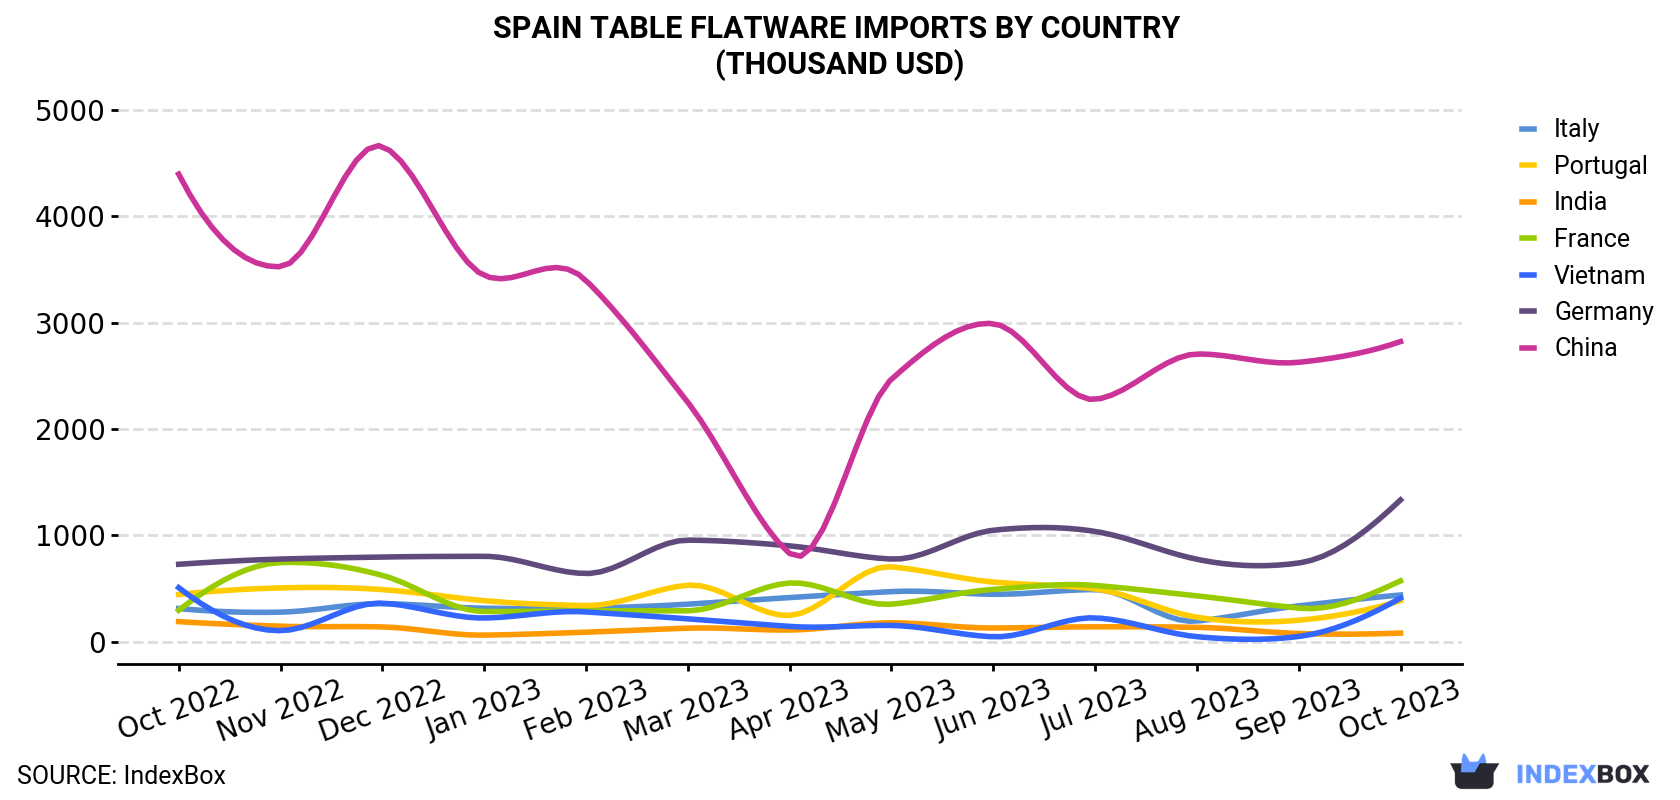 Spain Table Flatware Imports By Country (Thousand USD)